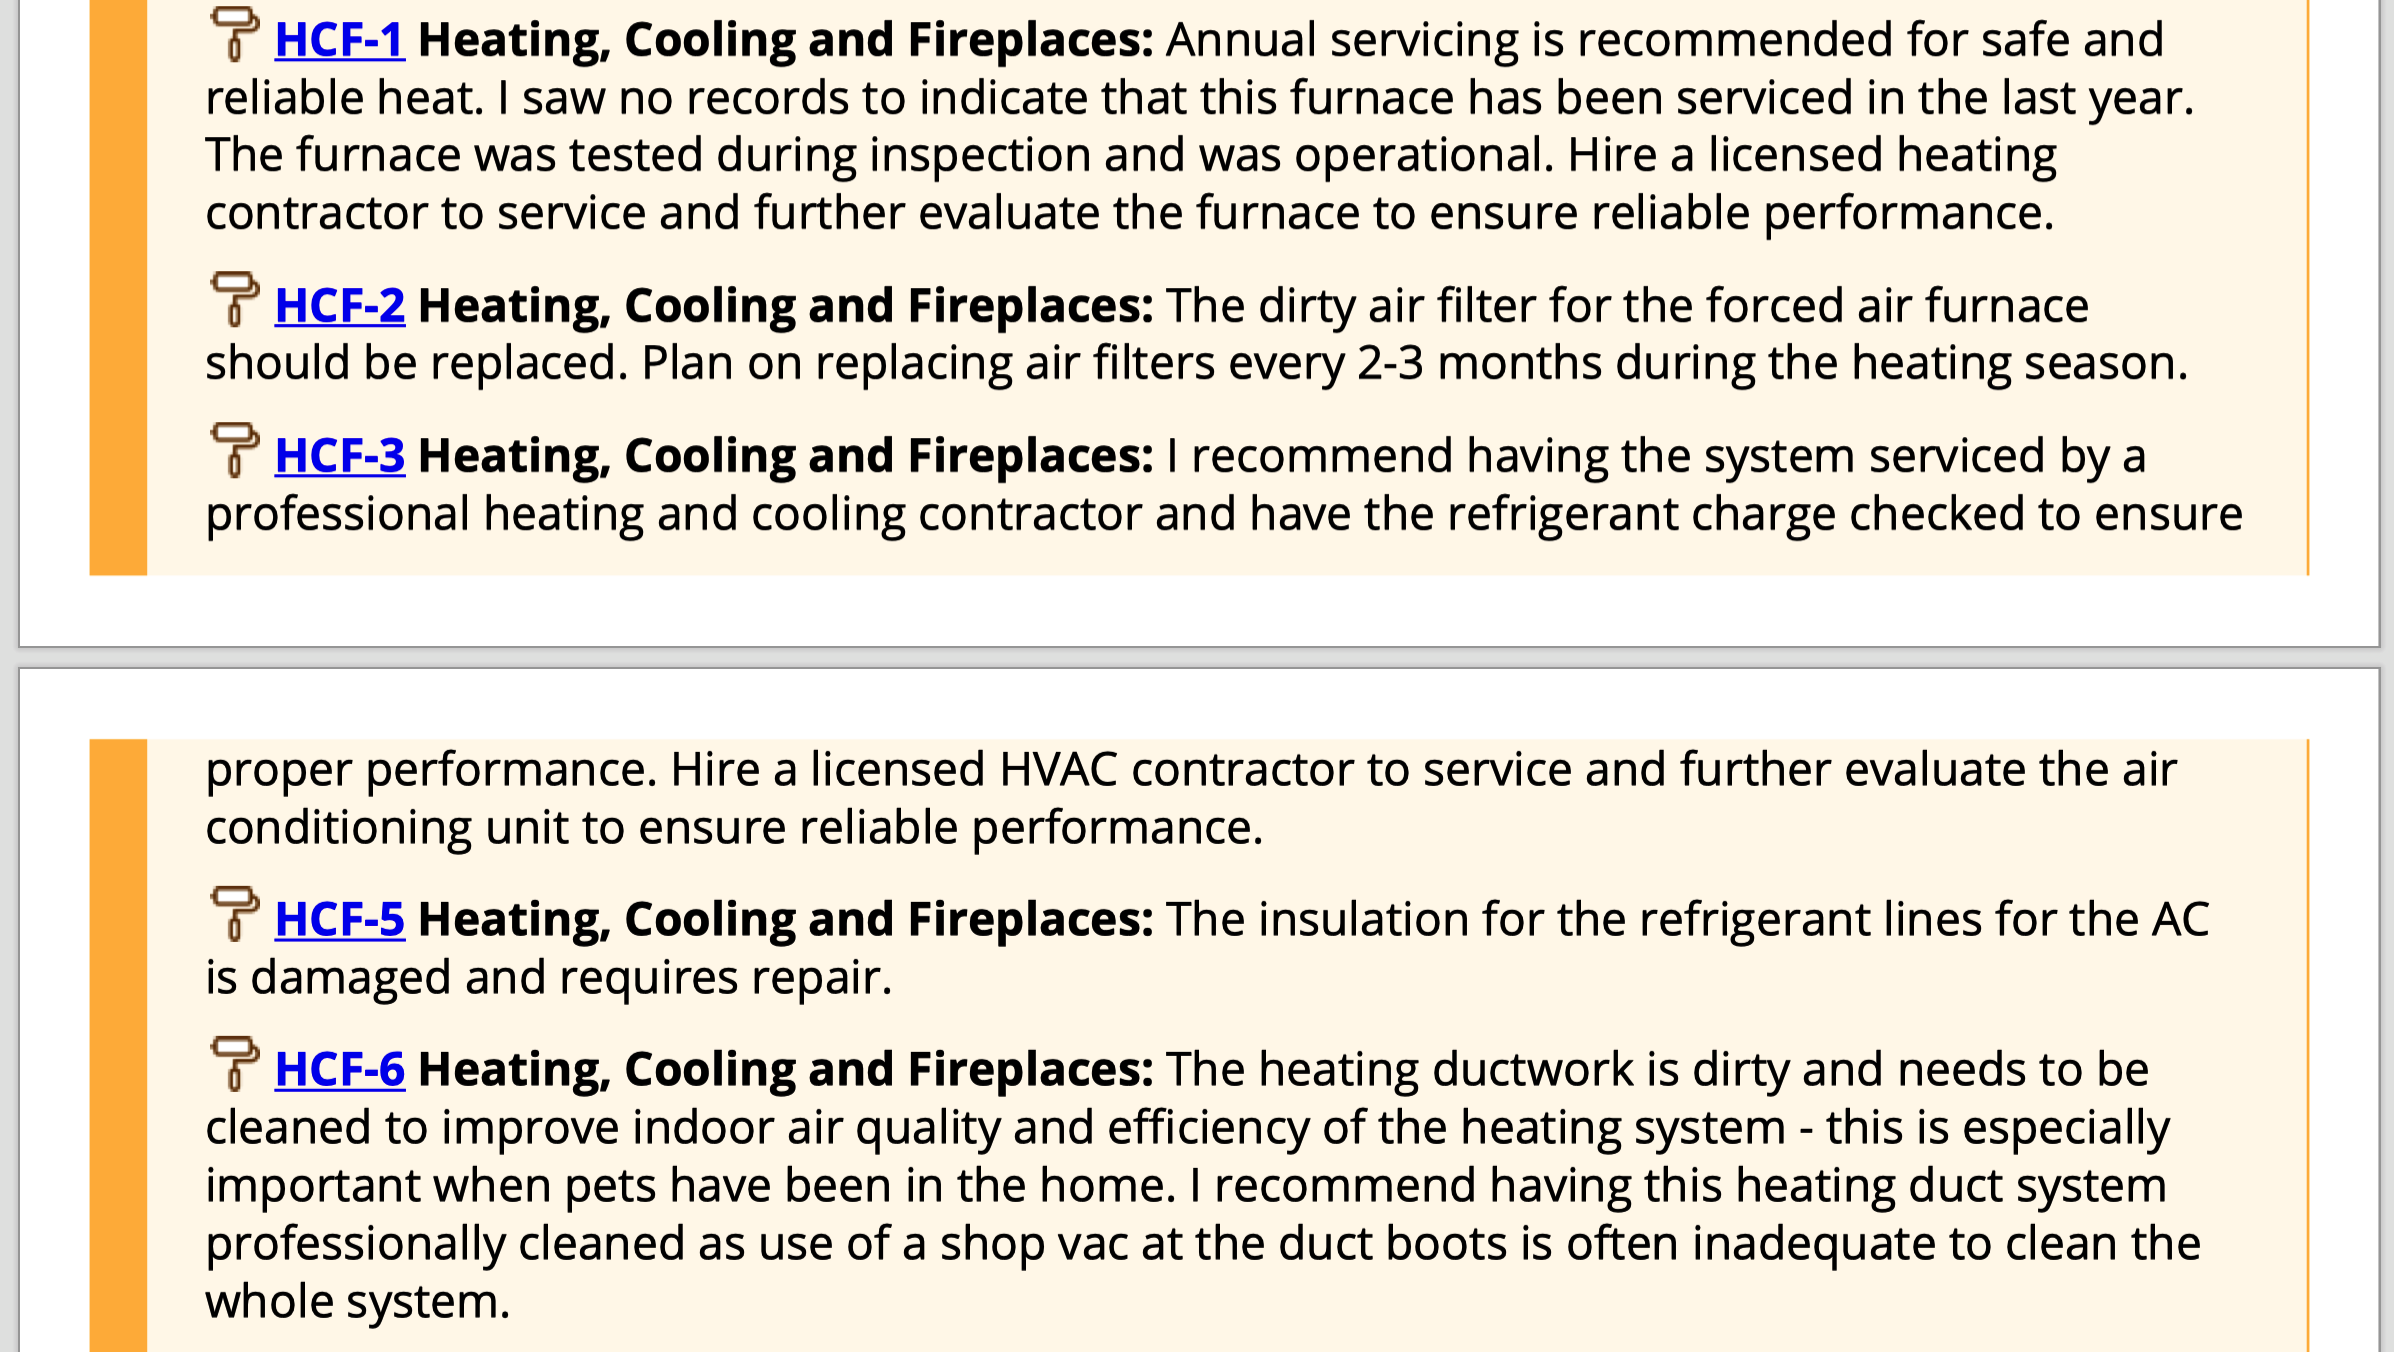 Heating, Cooling and Fireplaces